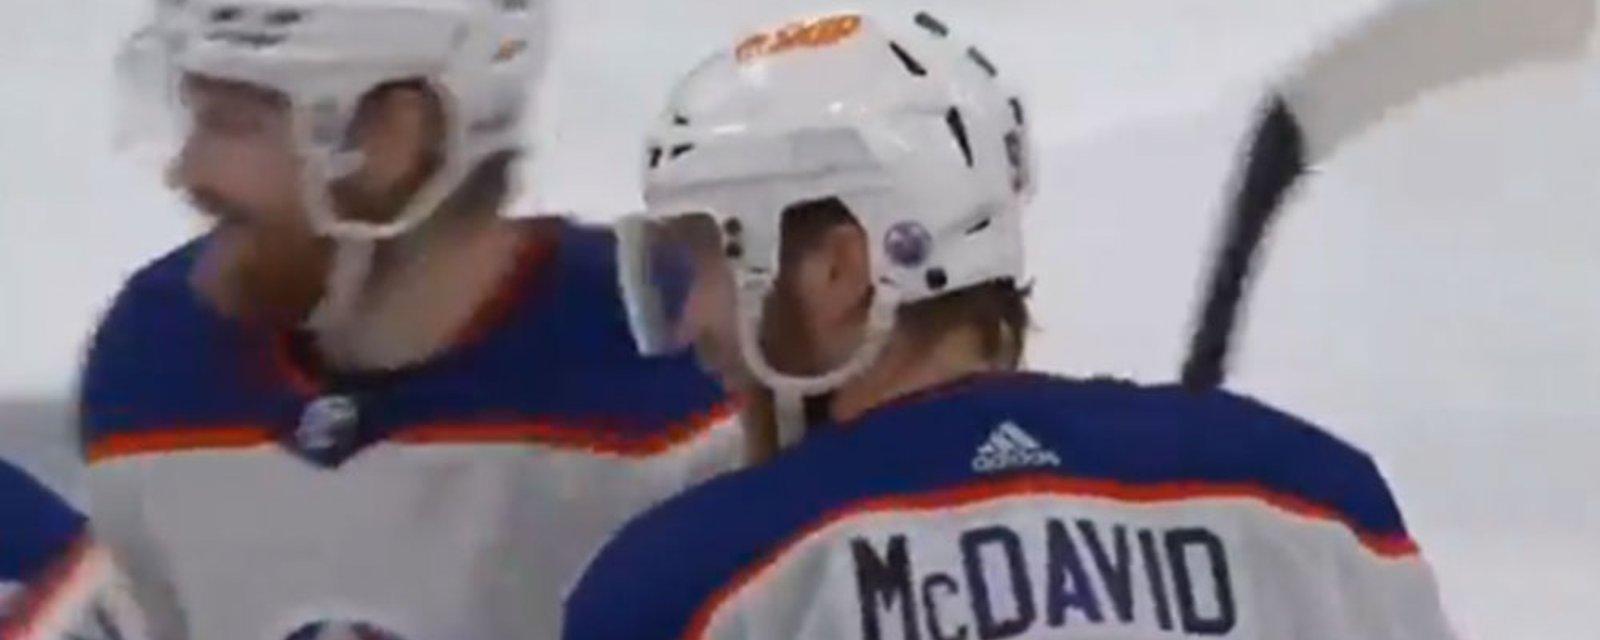 Connor McDavid scores in double OT to win Game 1 for the Oilers